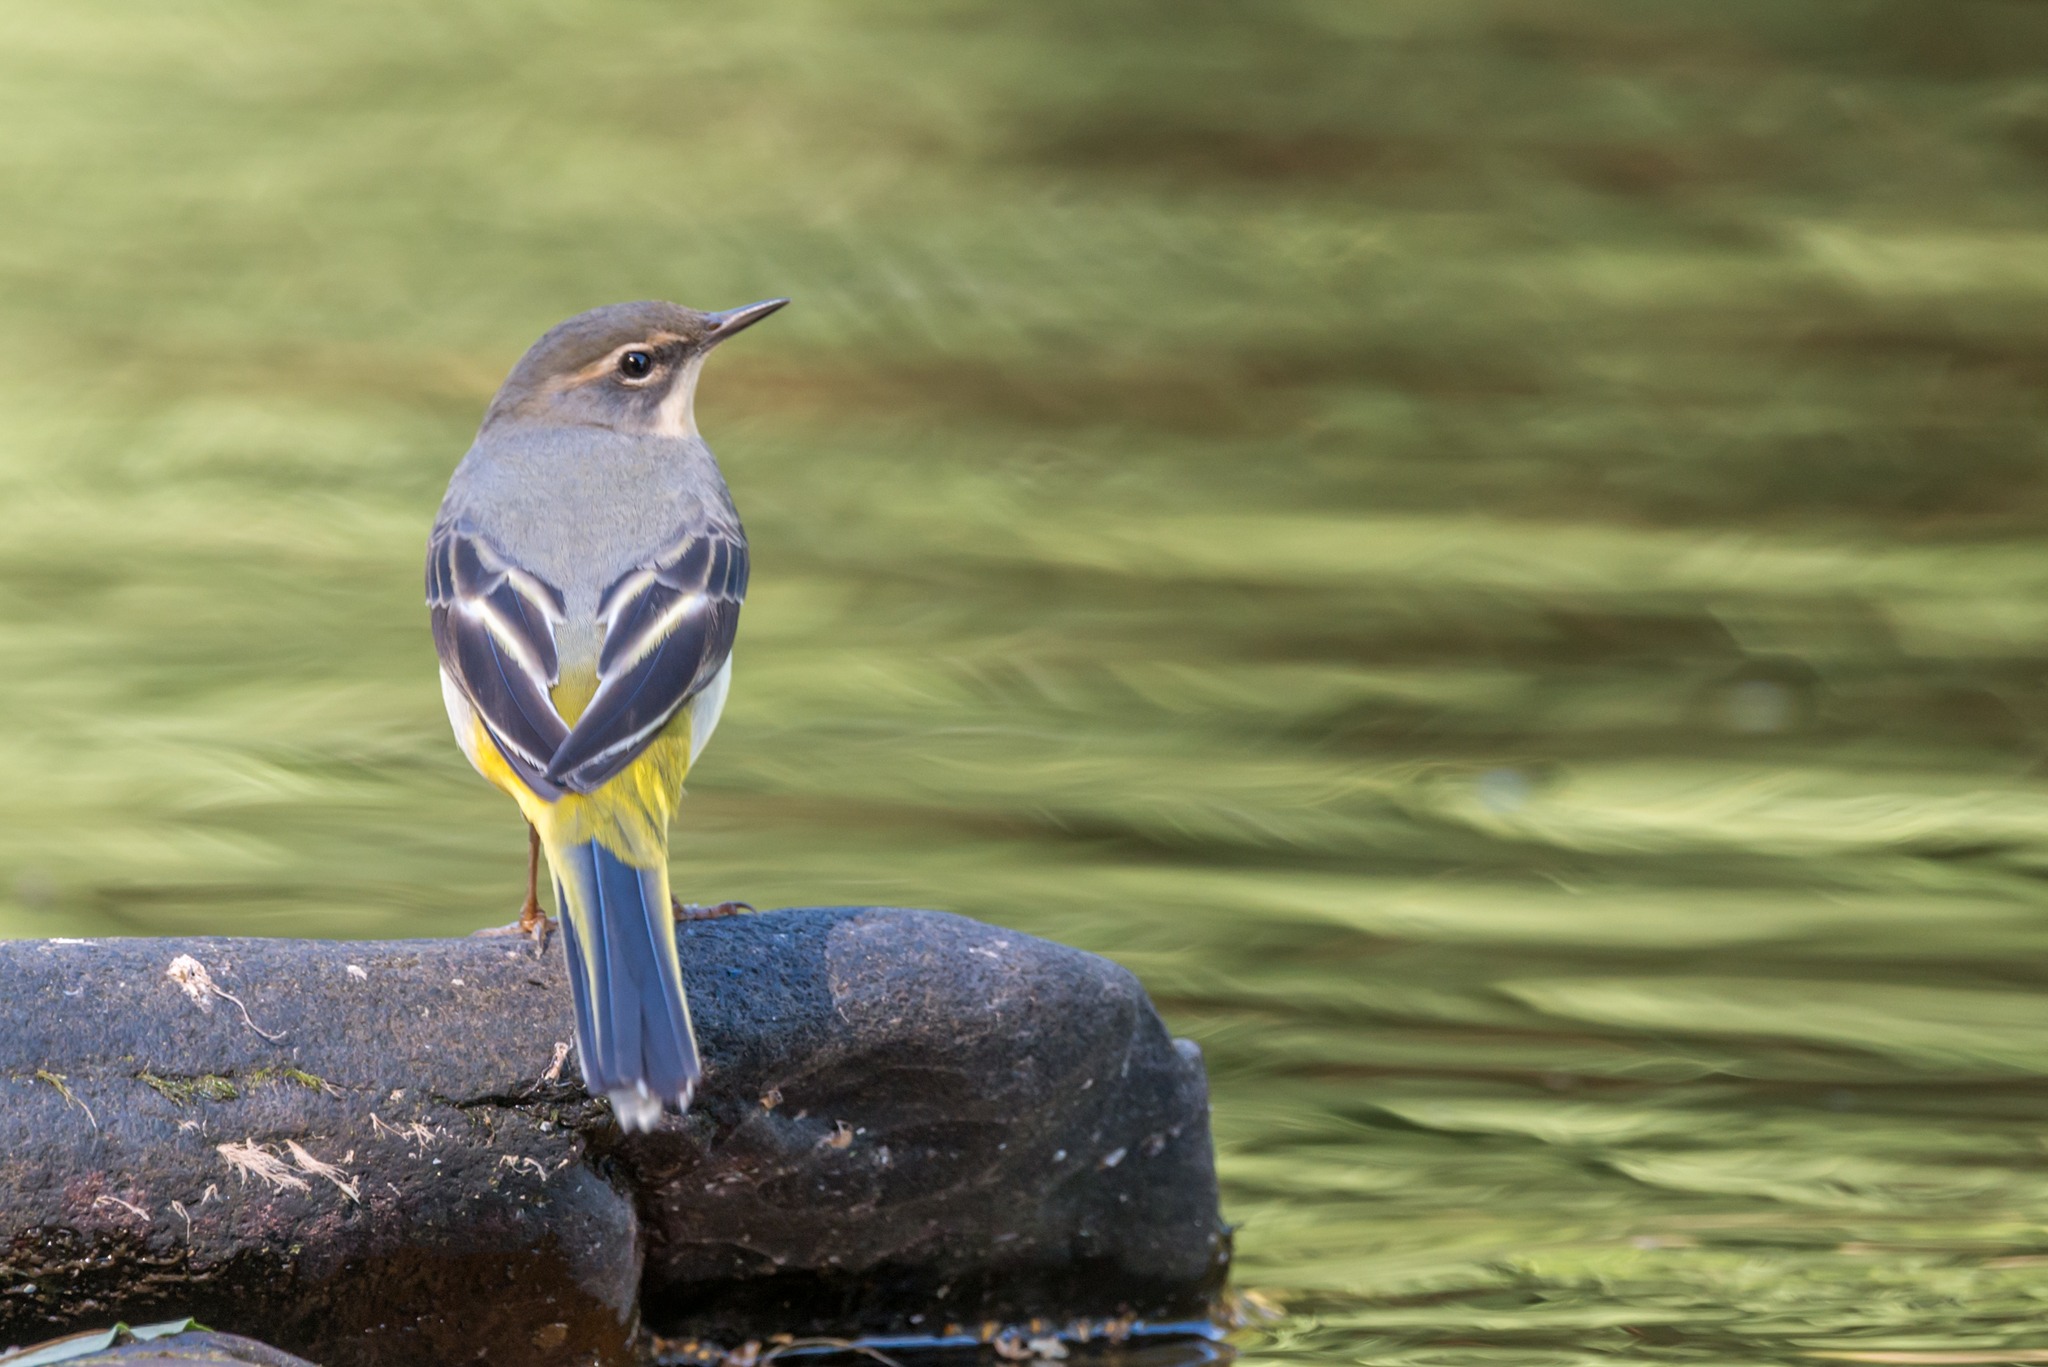 Grey wagtail on the river Usk with reflections on the water.